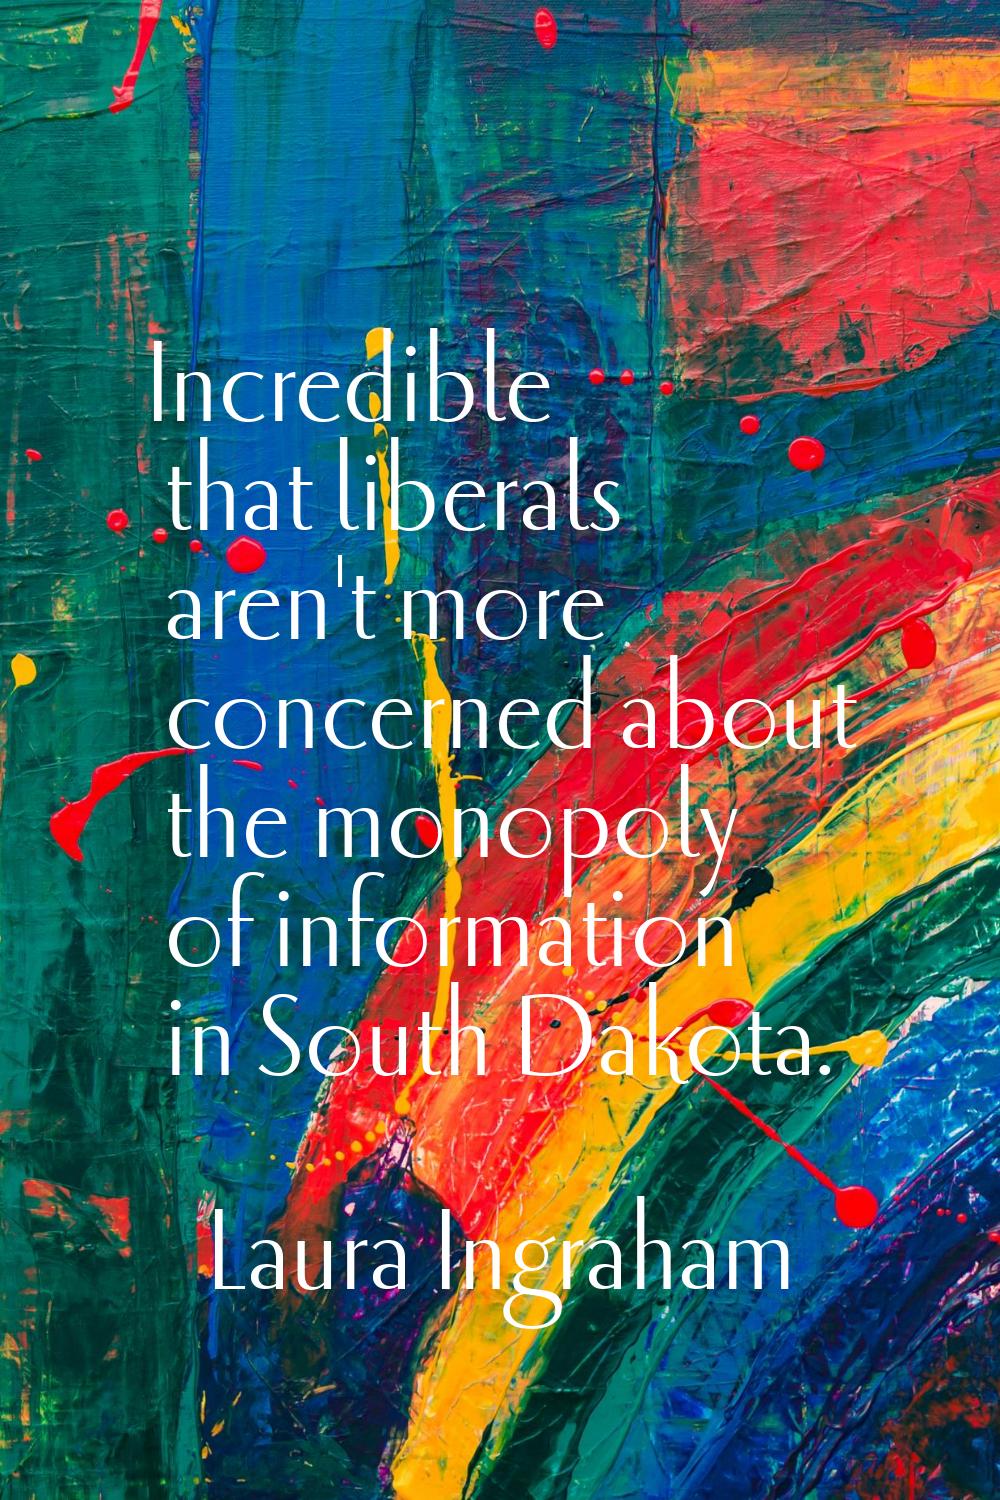 Incredible that liberals aren't more concerned about the monopoly of information in South Dakota.